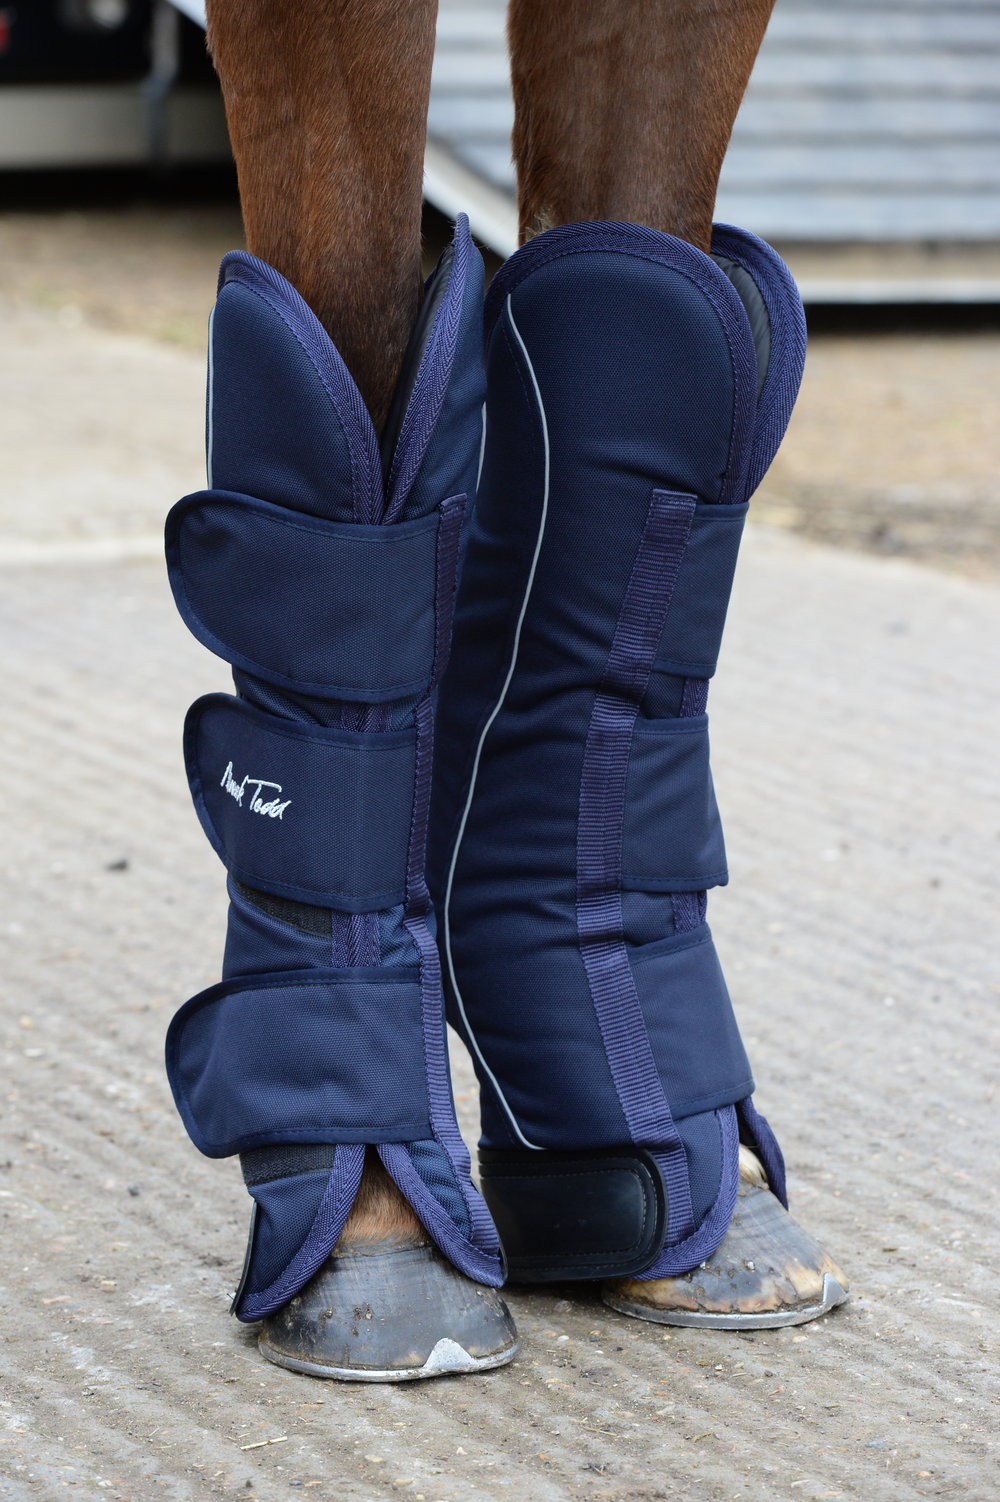 mark todd travel boots